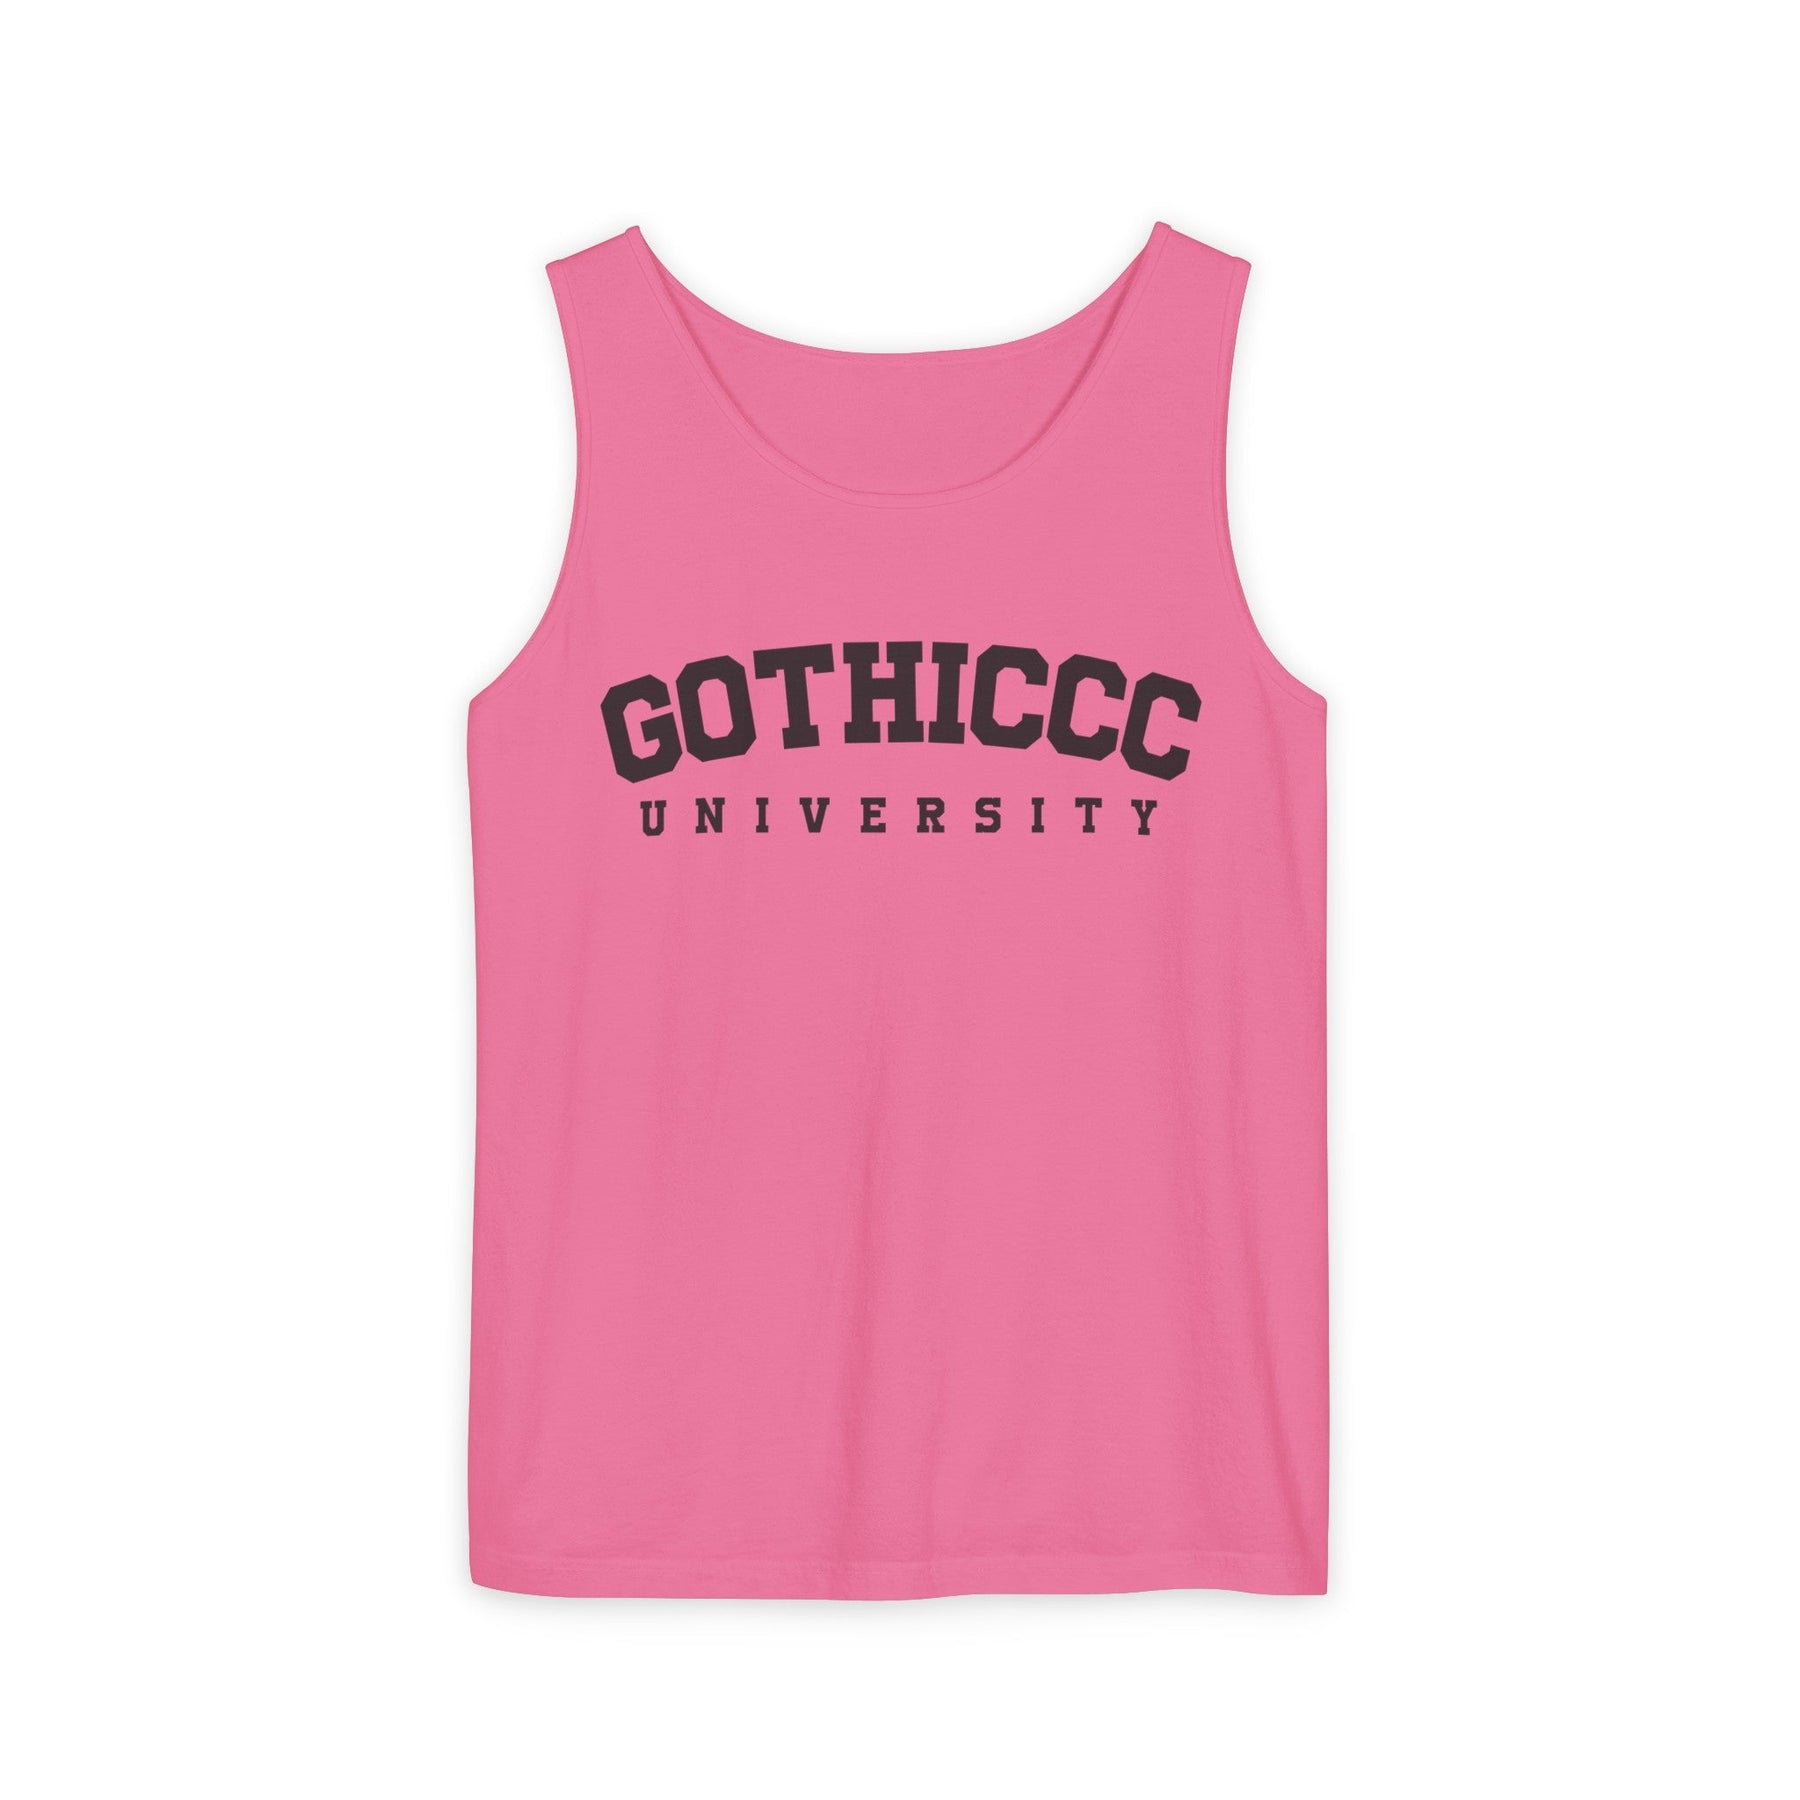 Gothiccc University Unisex Tank Top - Goth Cloth Co.Tank Top91120289349344917549